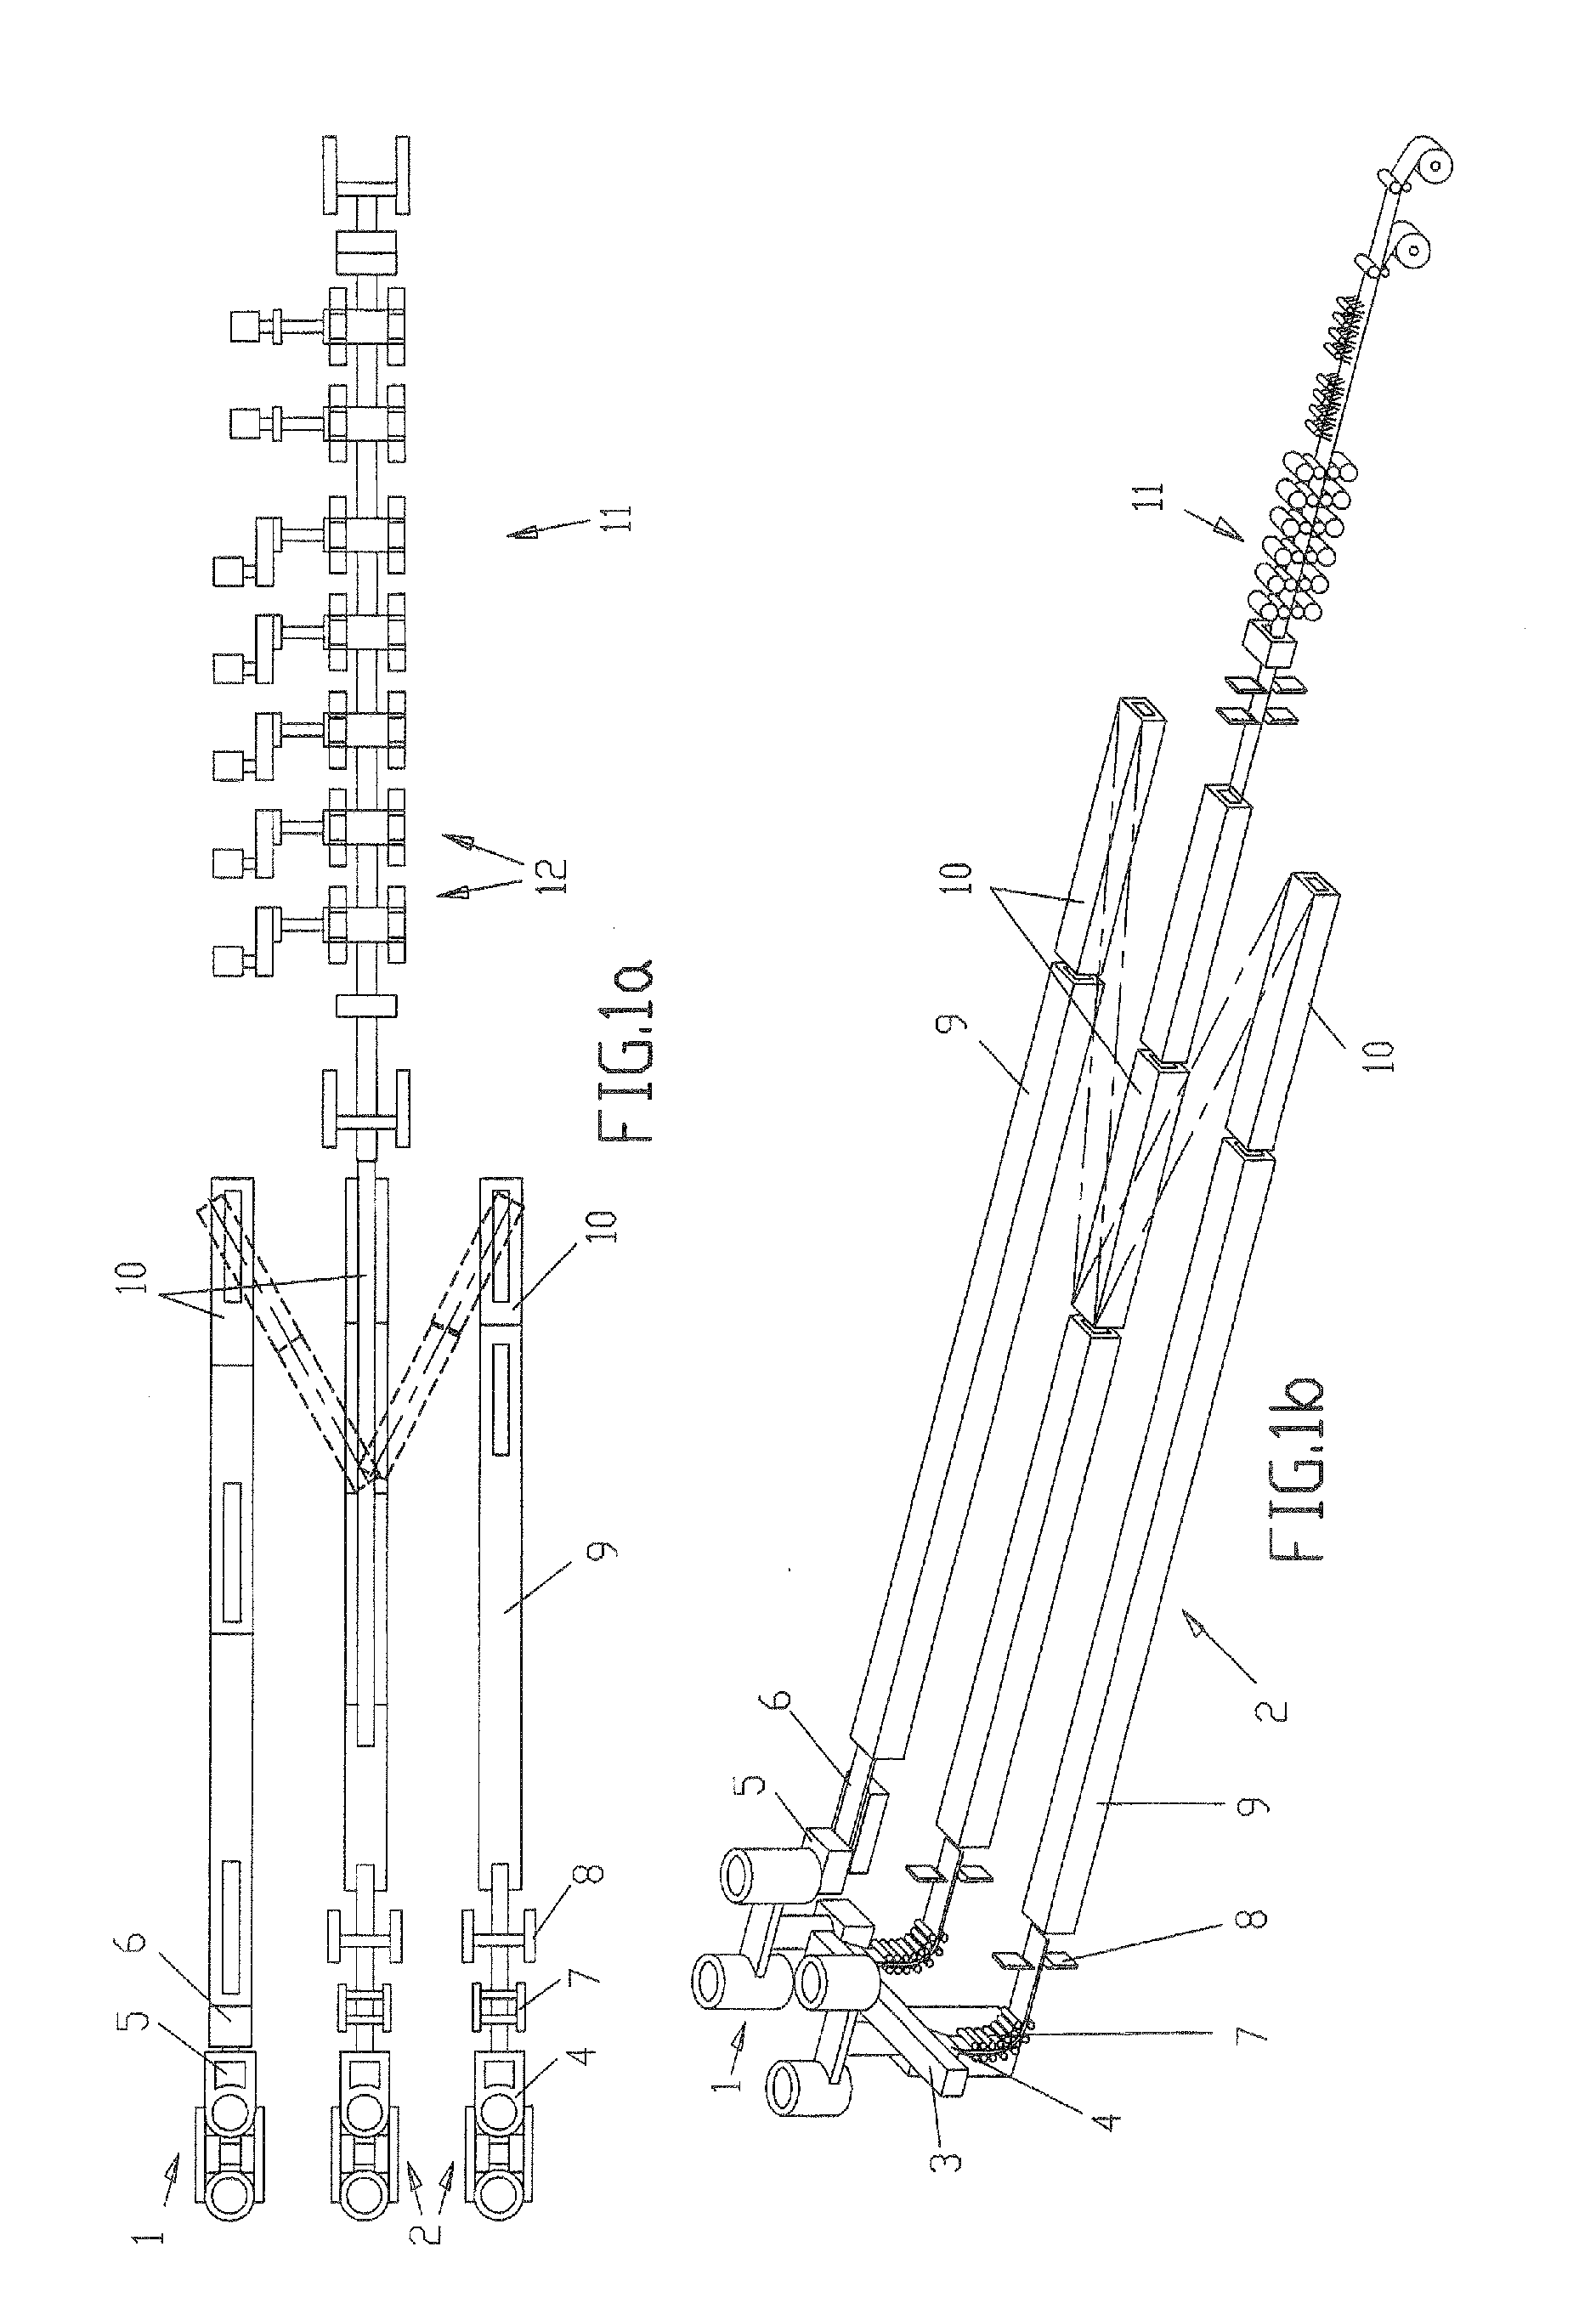 System and method for casting and rolling metal